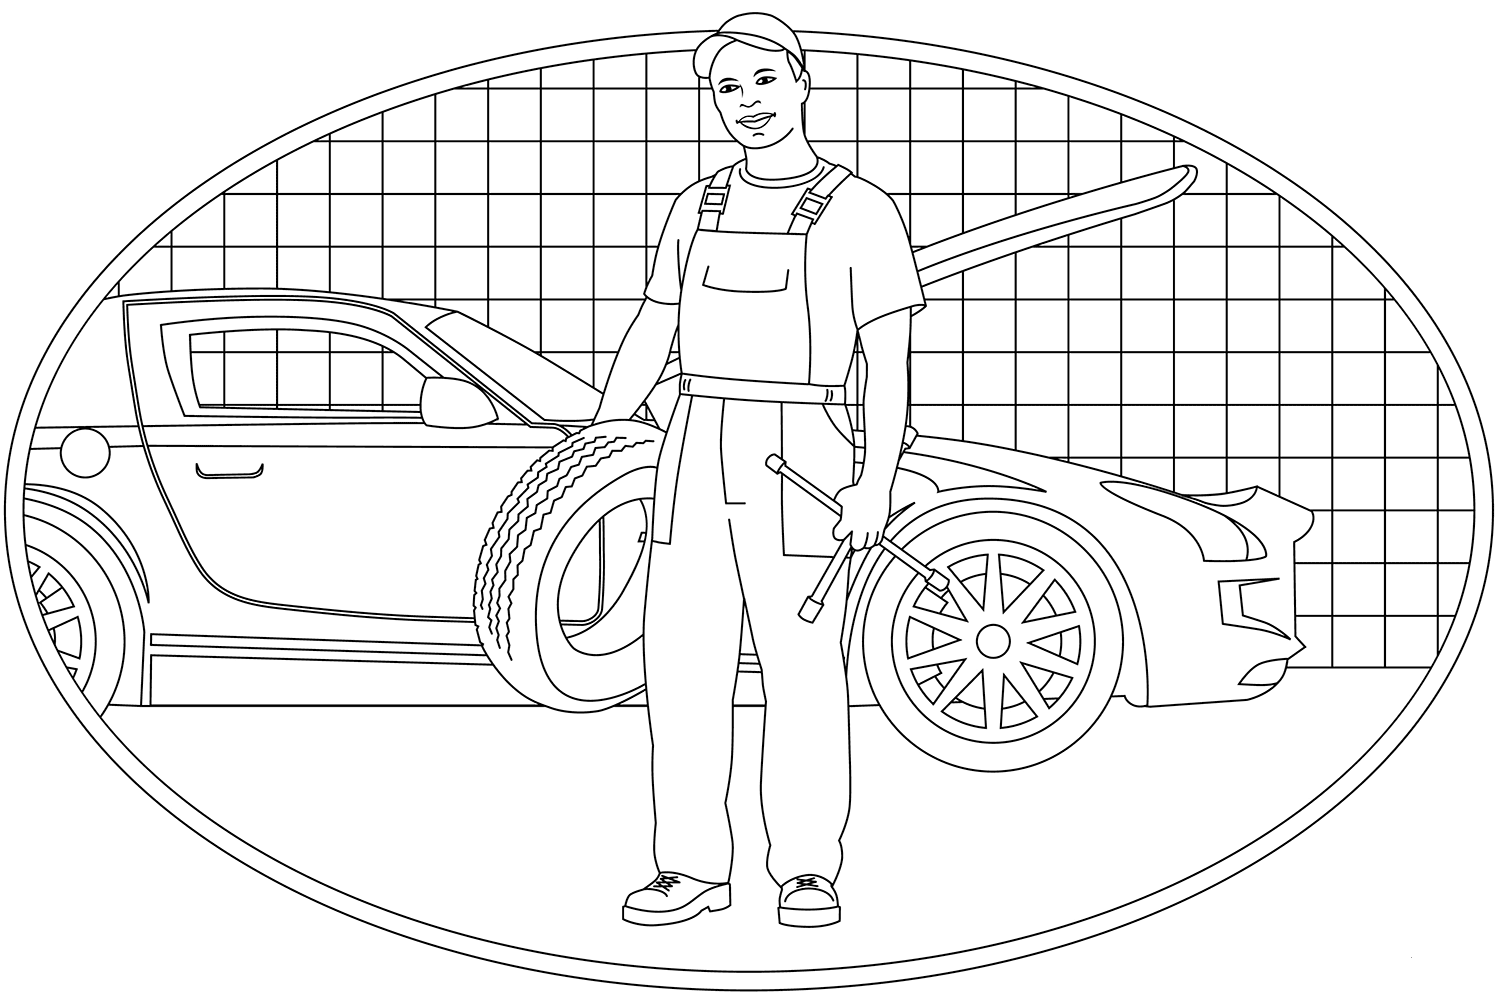 Mechanic coloring page - ColouringPages